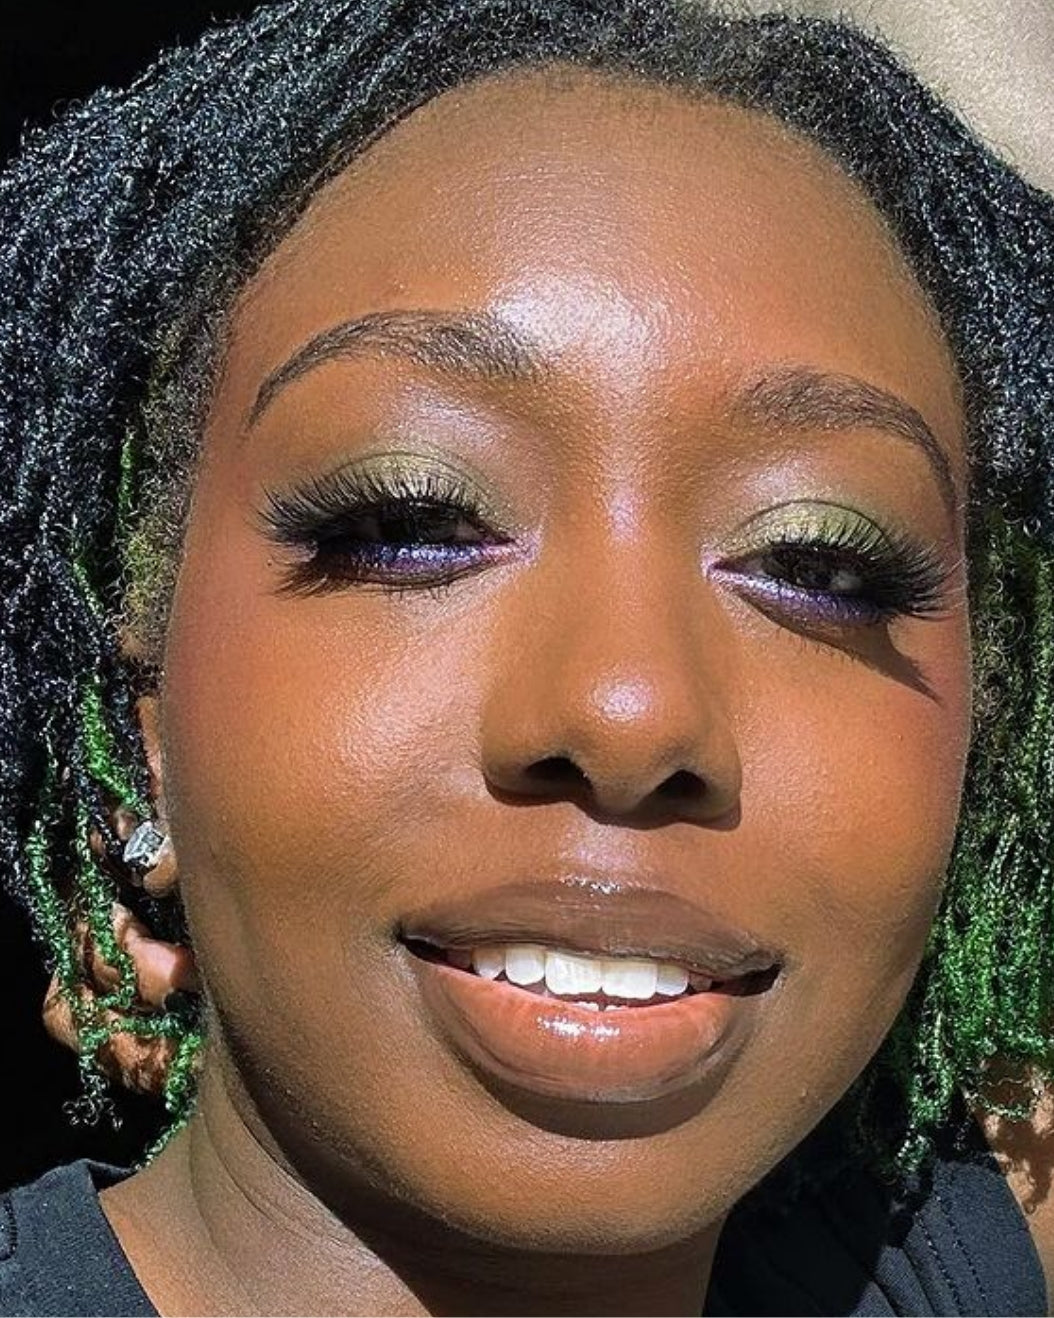 Model wears green and purple shimmery eyeshadow for holiday makeup inspiration